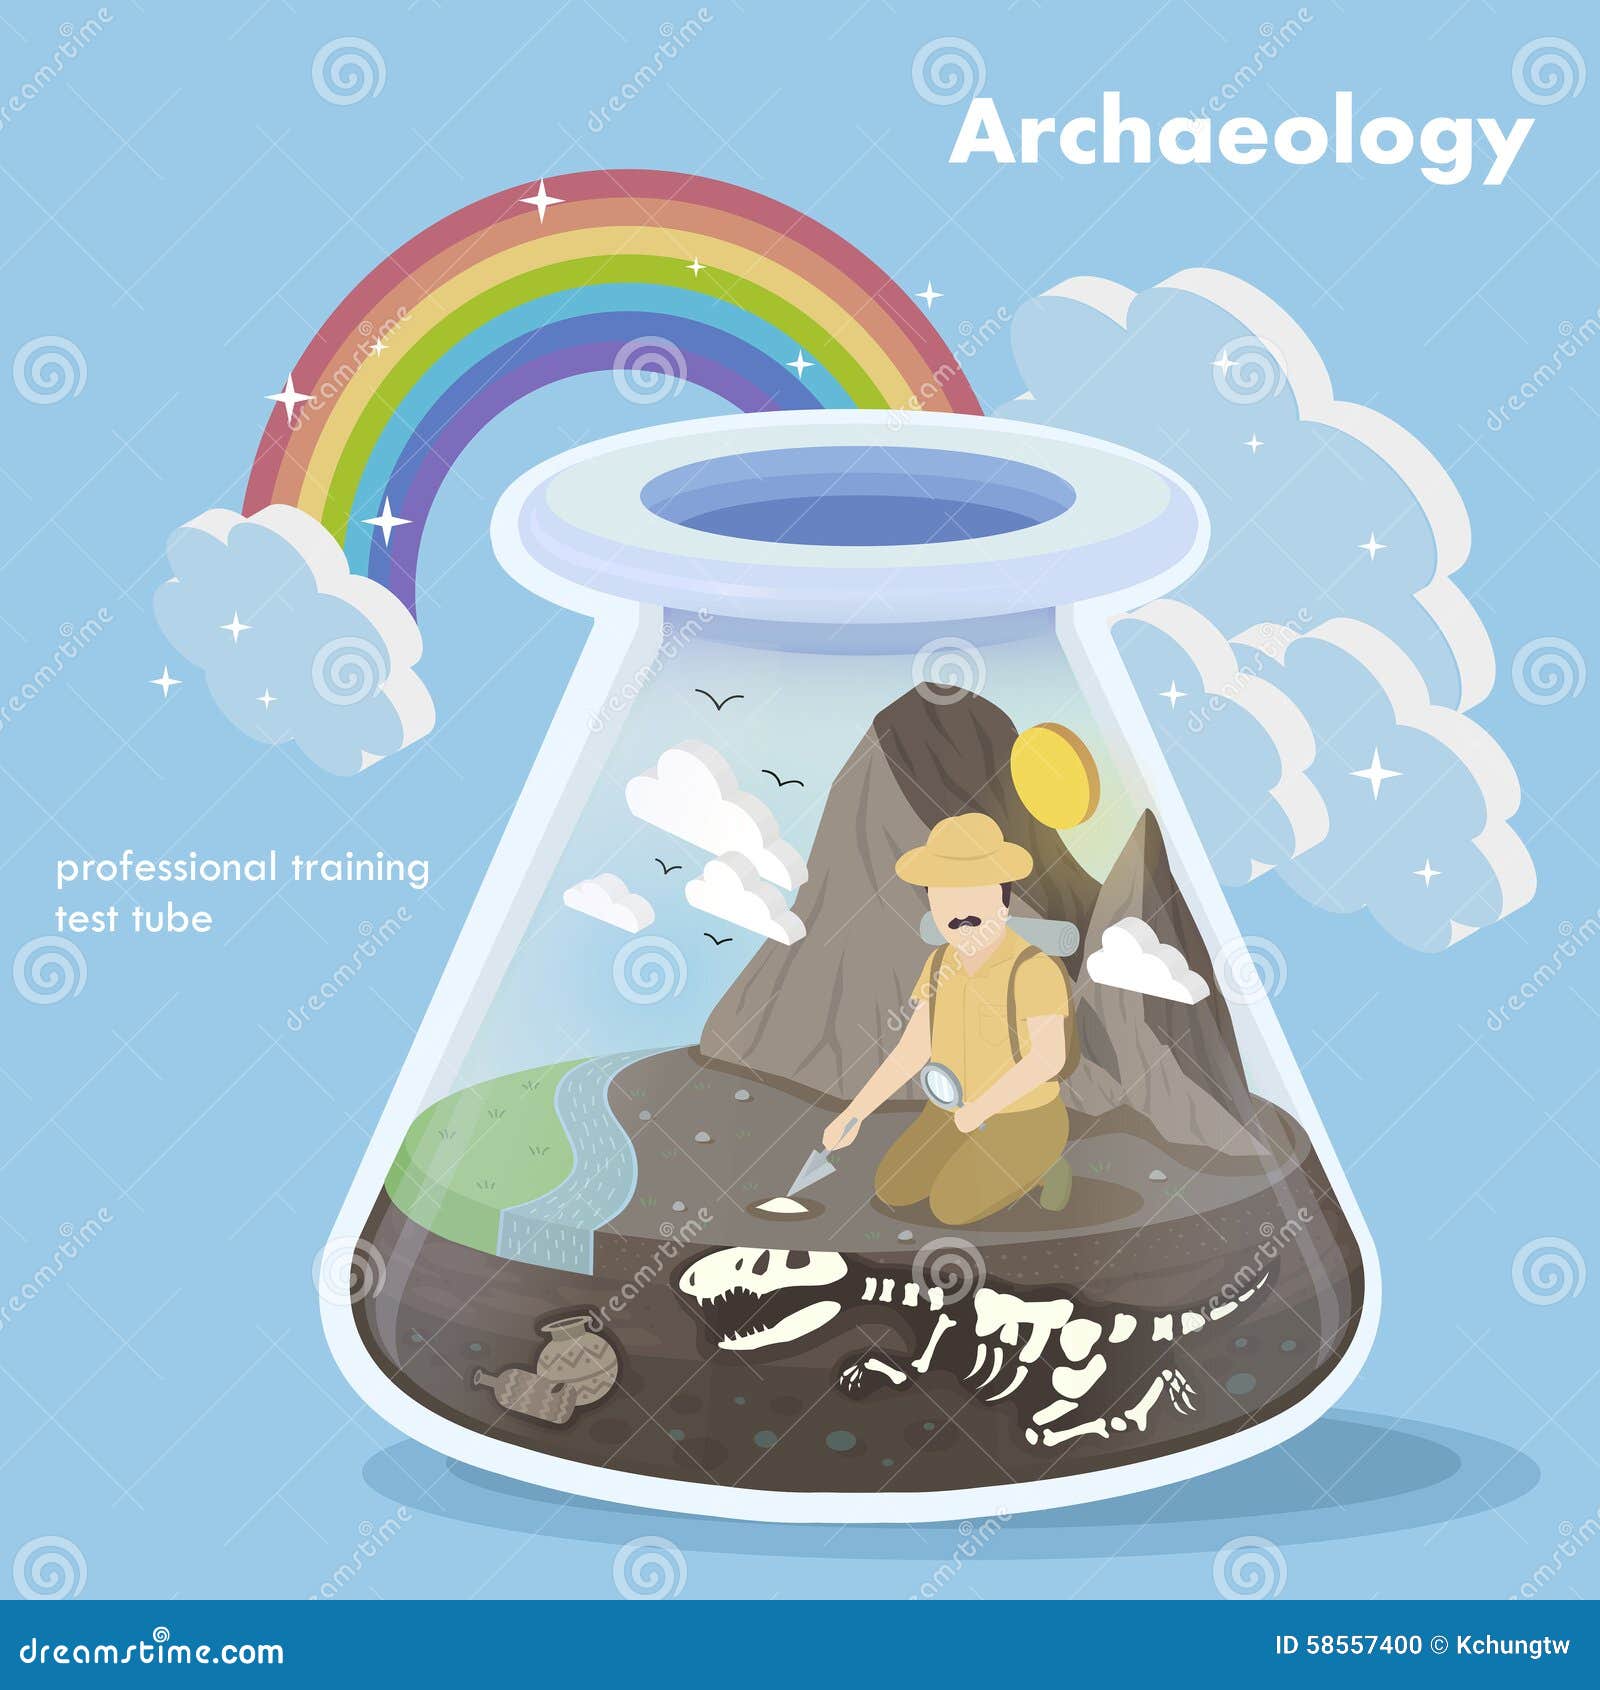 archaeology concept